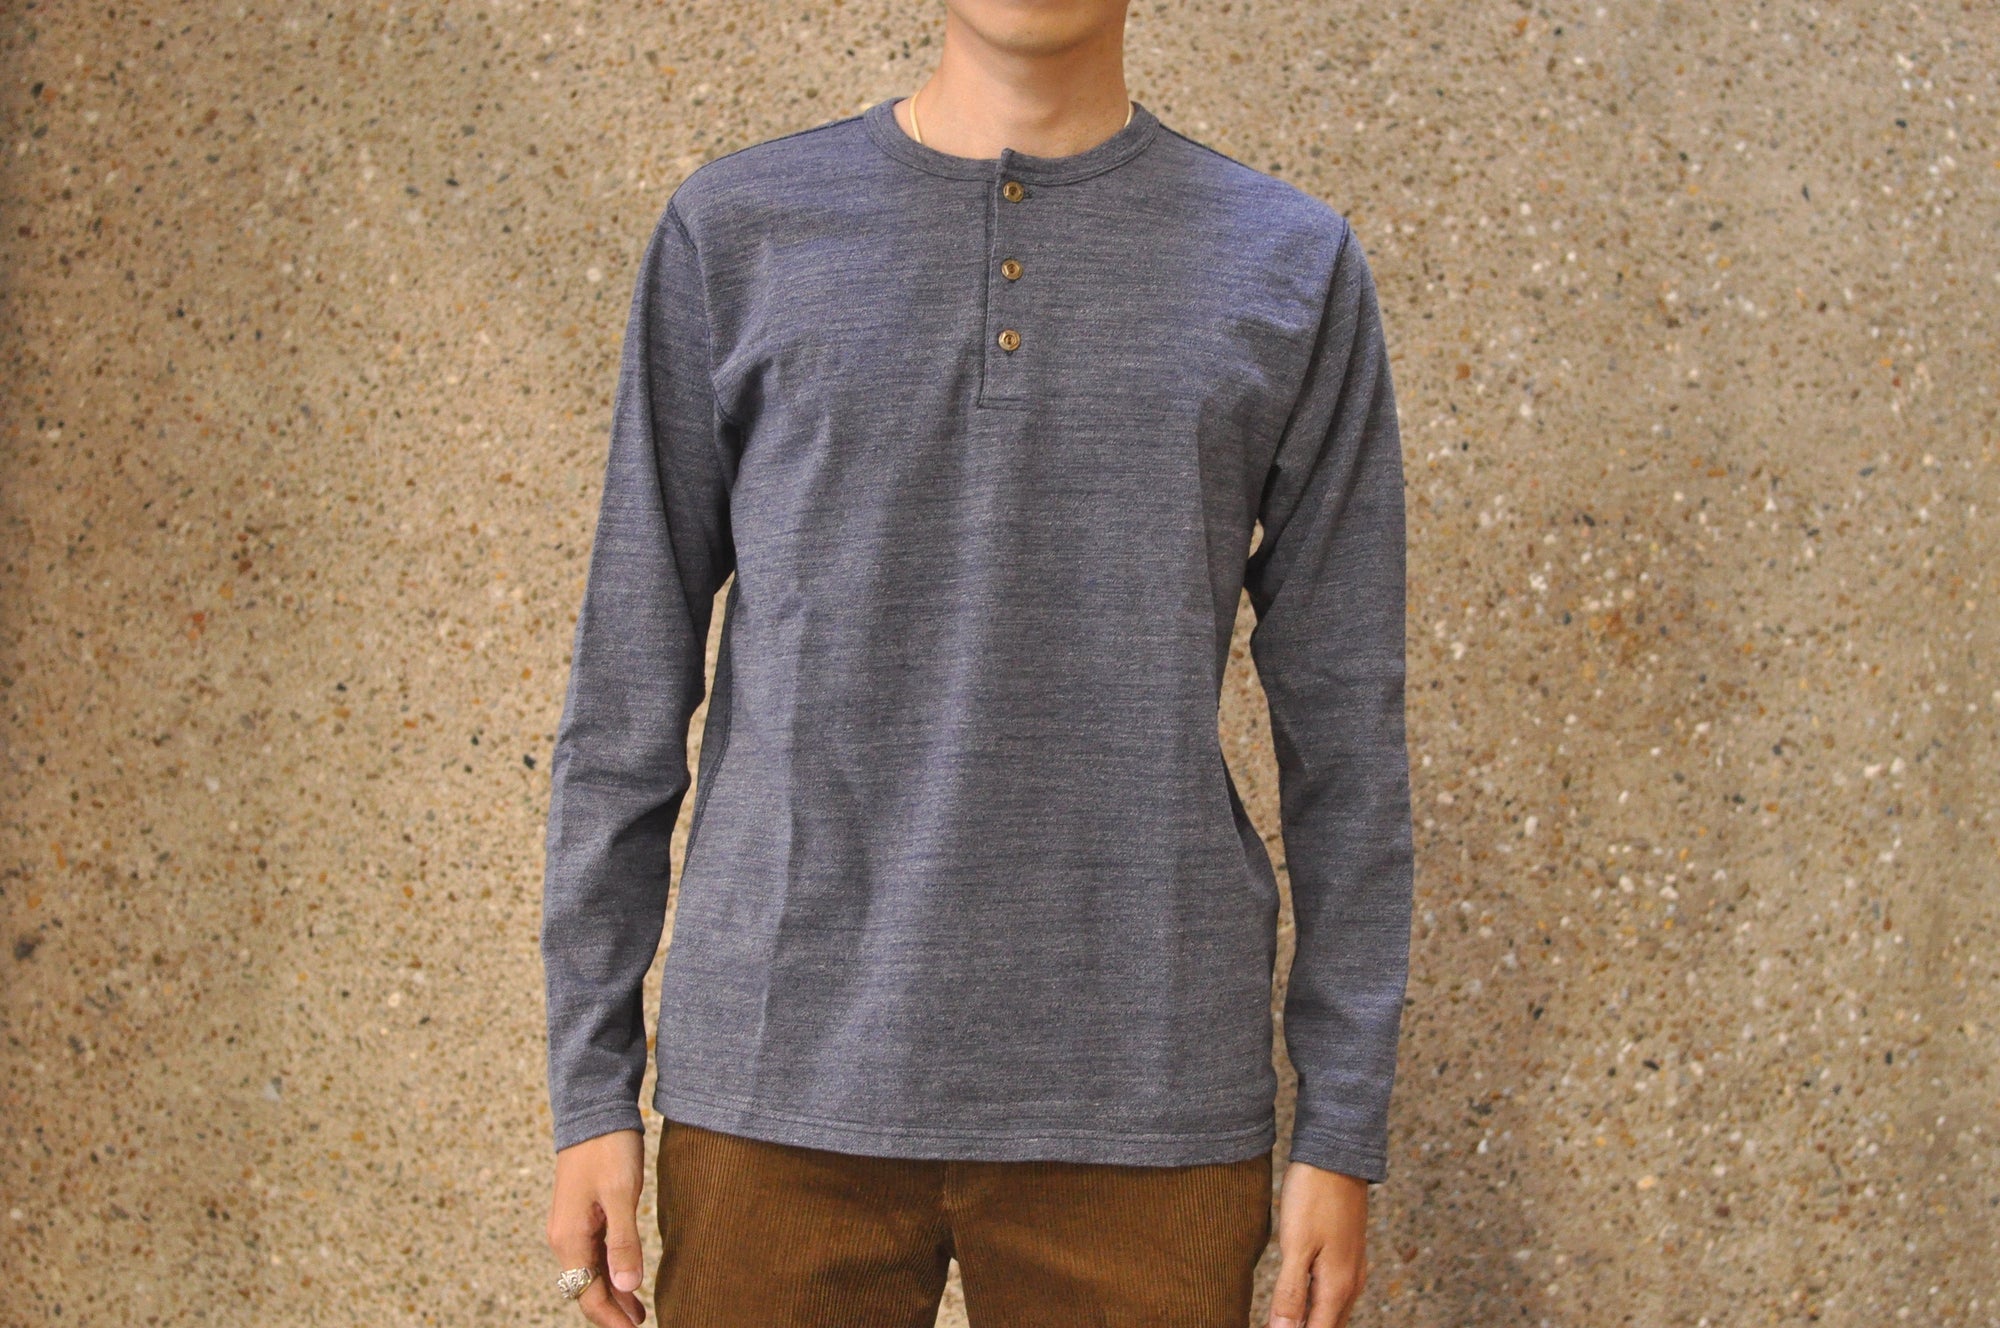 Studio D'Artisan X CORLECTION 7.5oz 'Suvin Gold' Ultimate Loopwheeled L/S Henley Tee (Heather Navy)